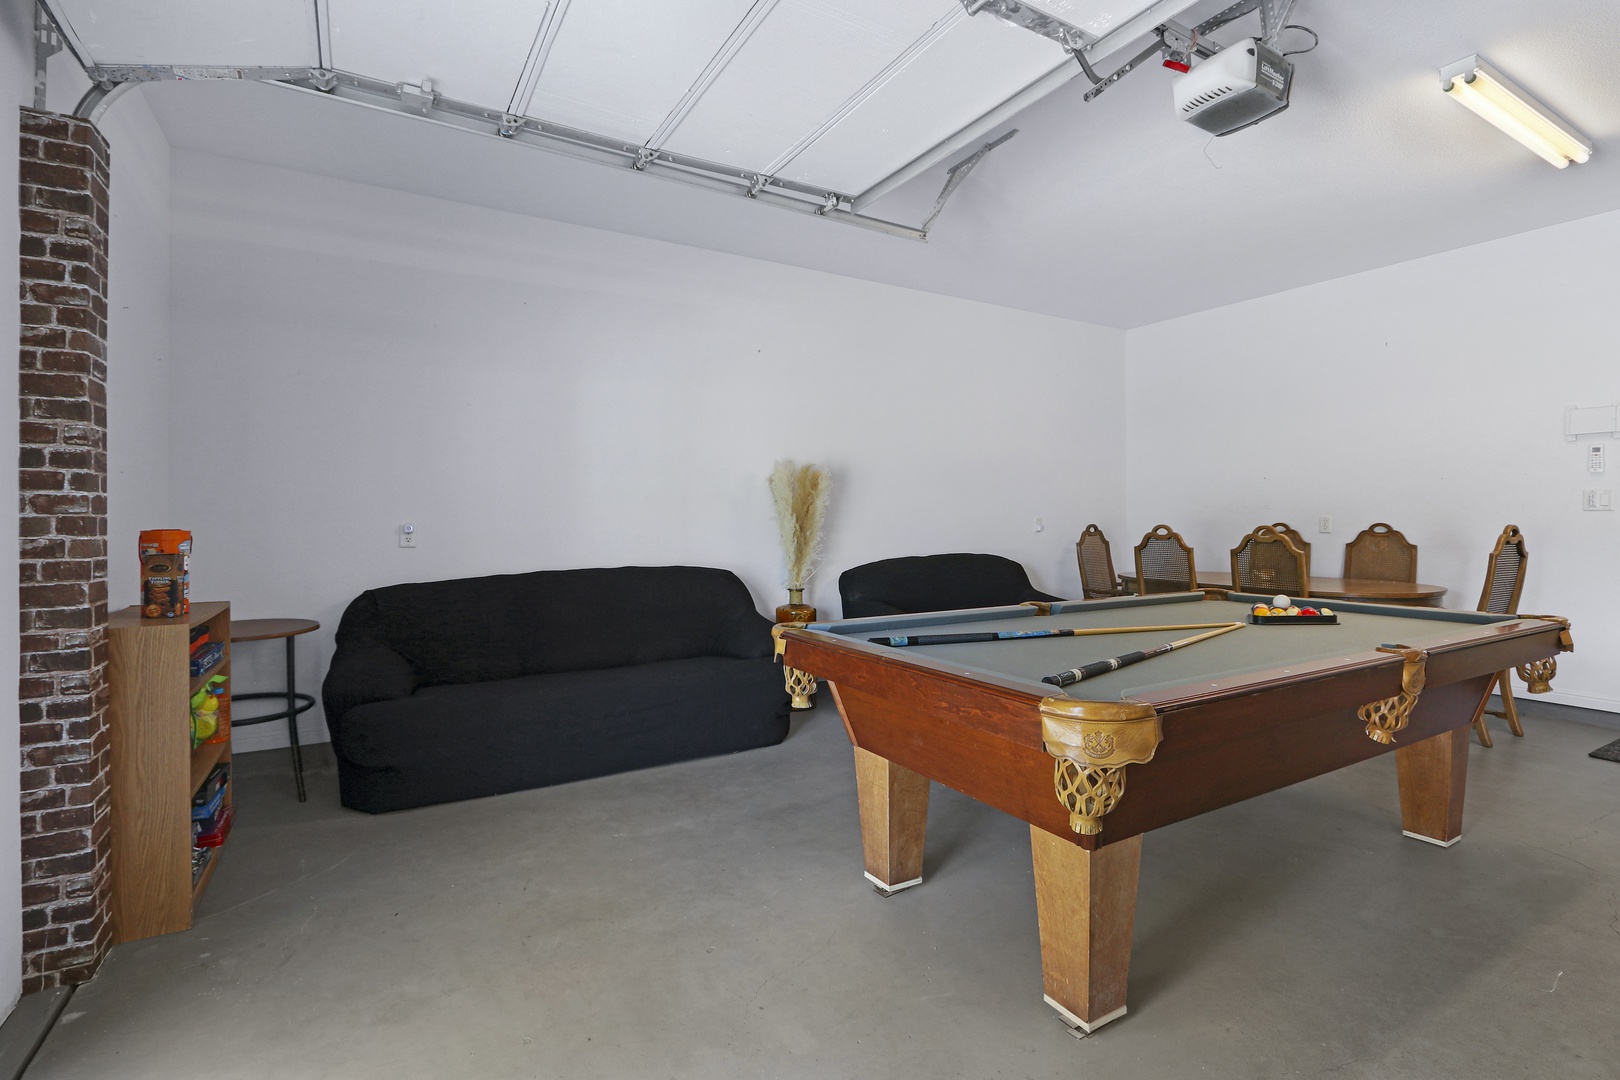 The 1st floor game room is the perfect hang-out spot with games & amenities